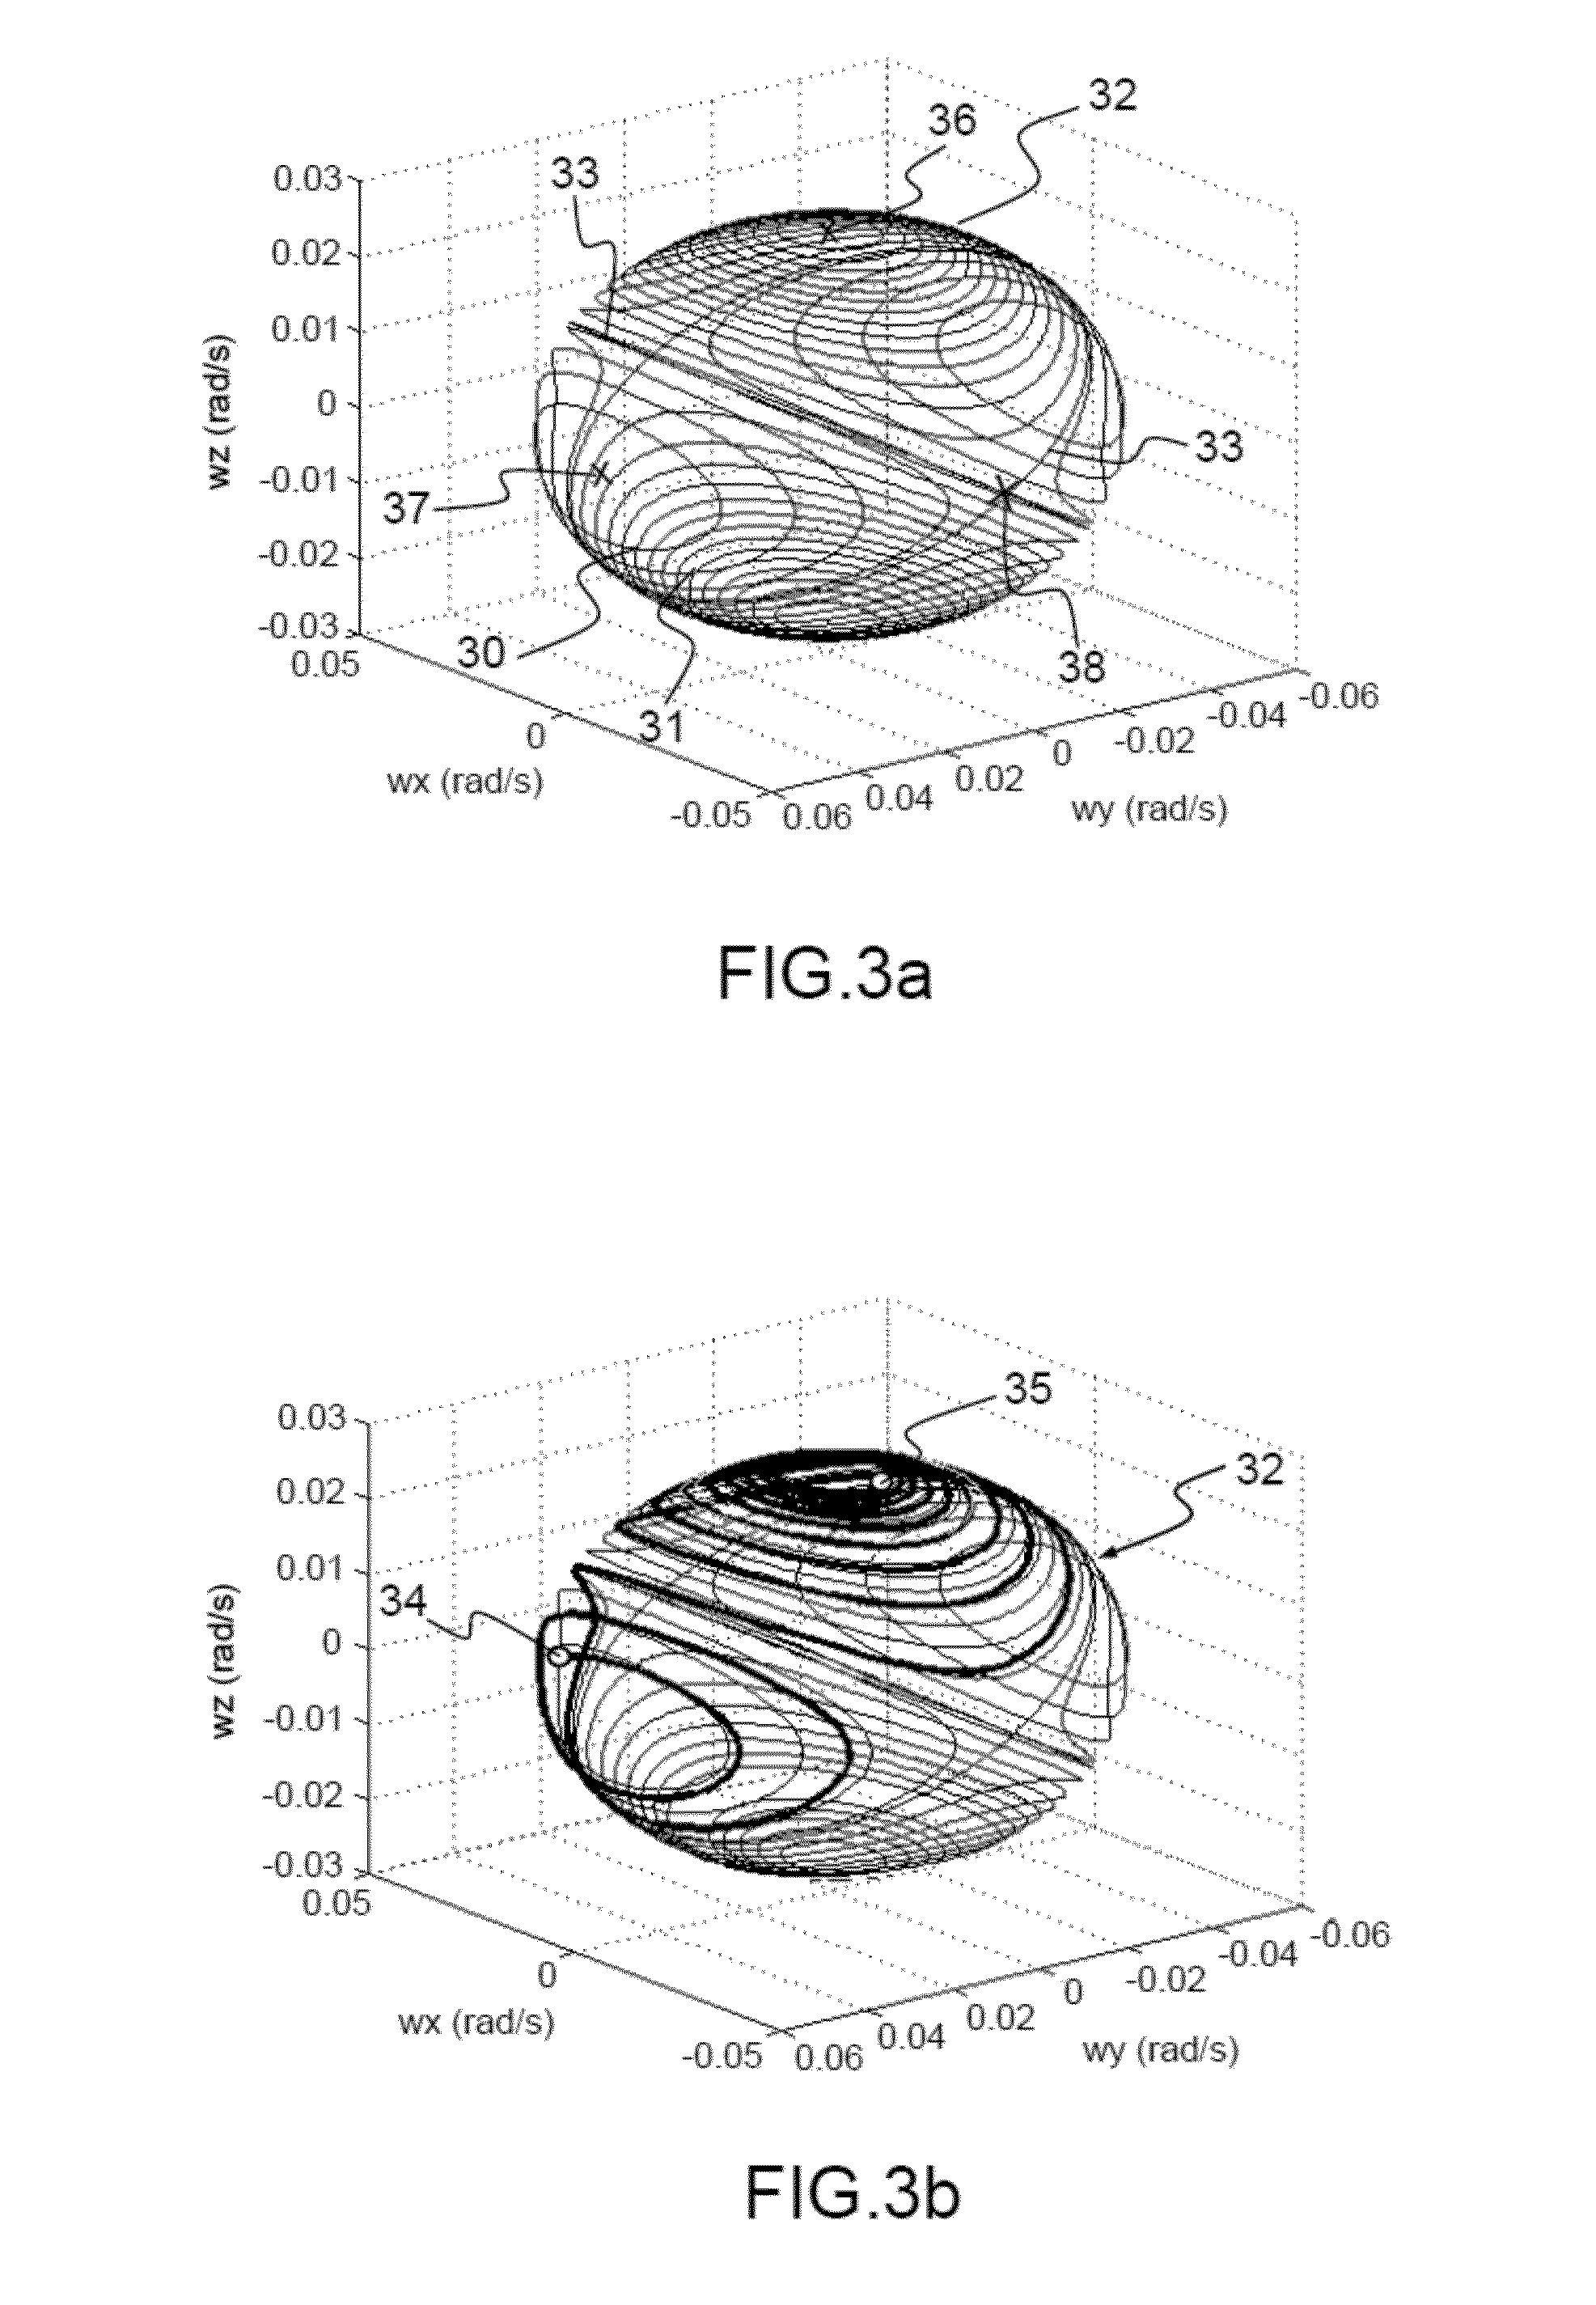 Method For Reducing the Angular Momentum and Controlling the Attitude of a Spacecraft